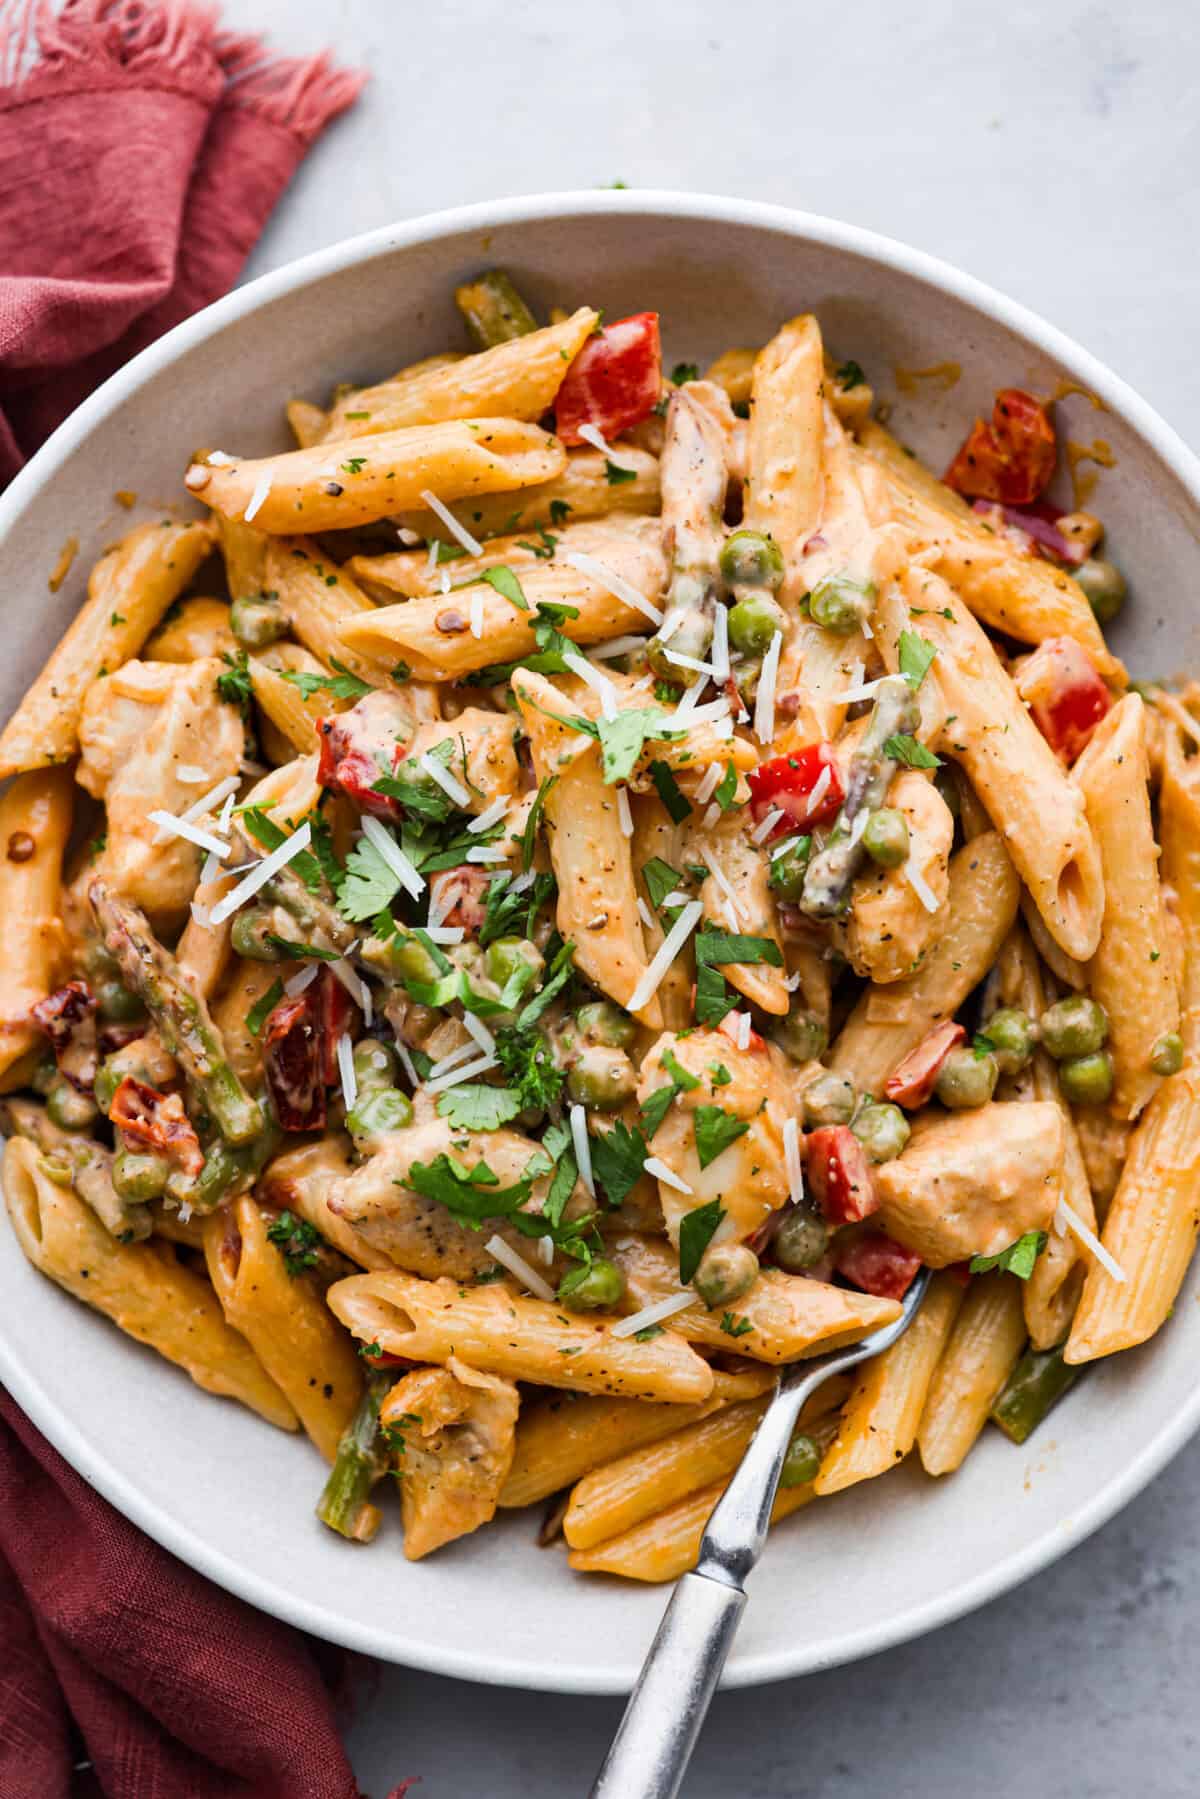 A serving of chipotle pasta.